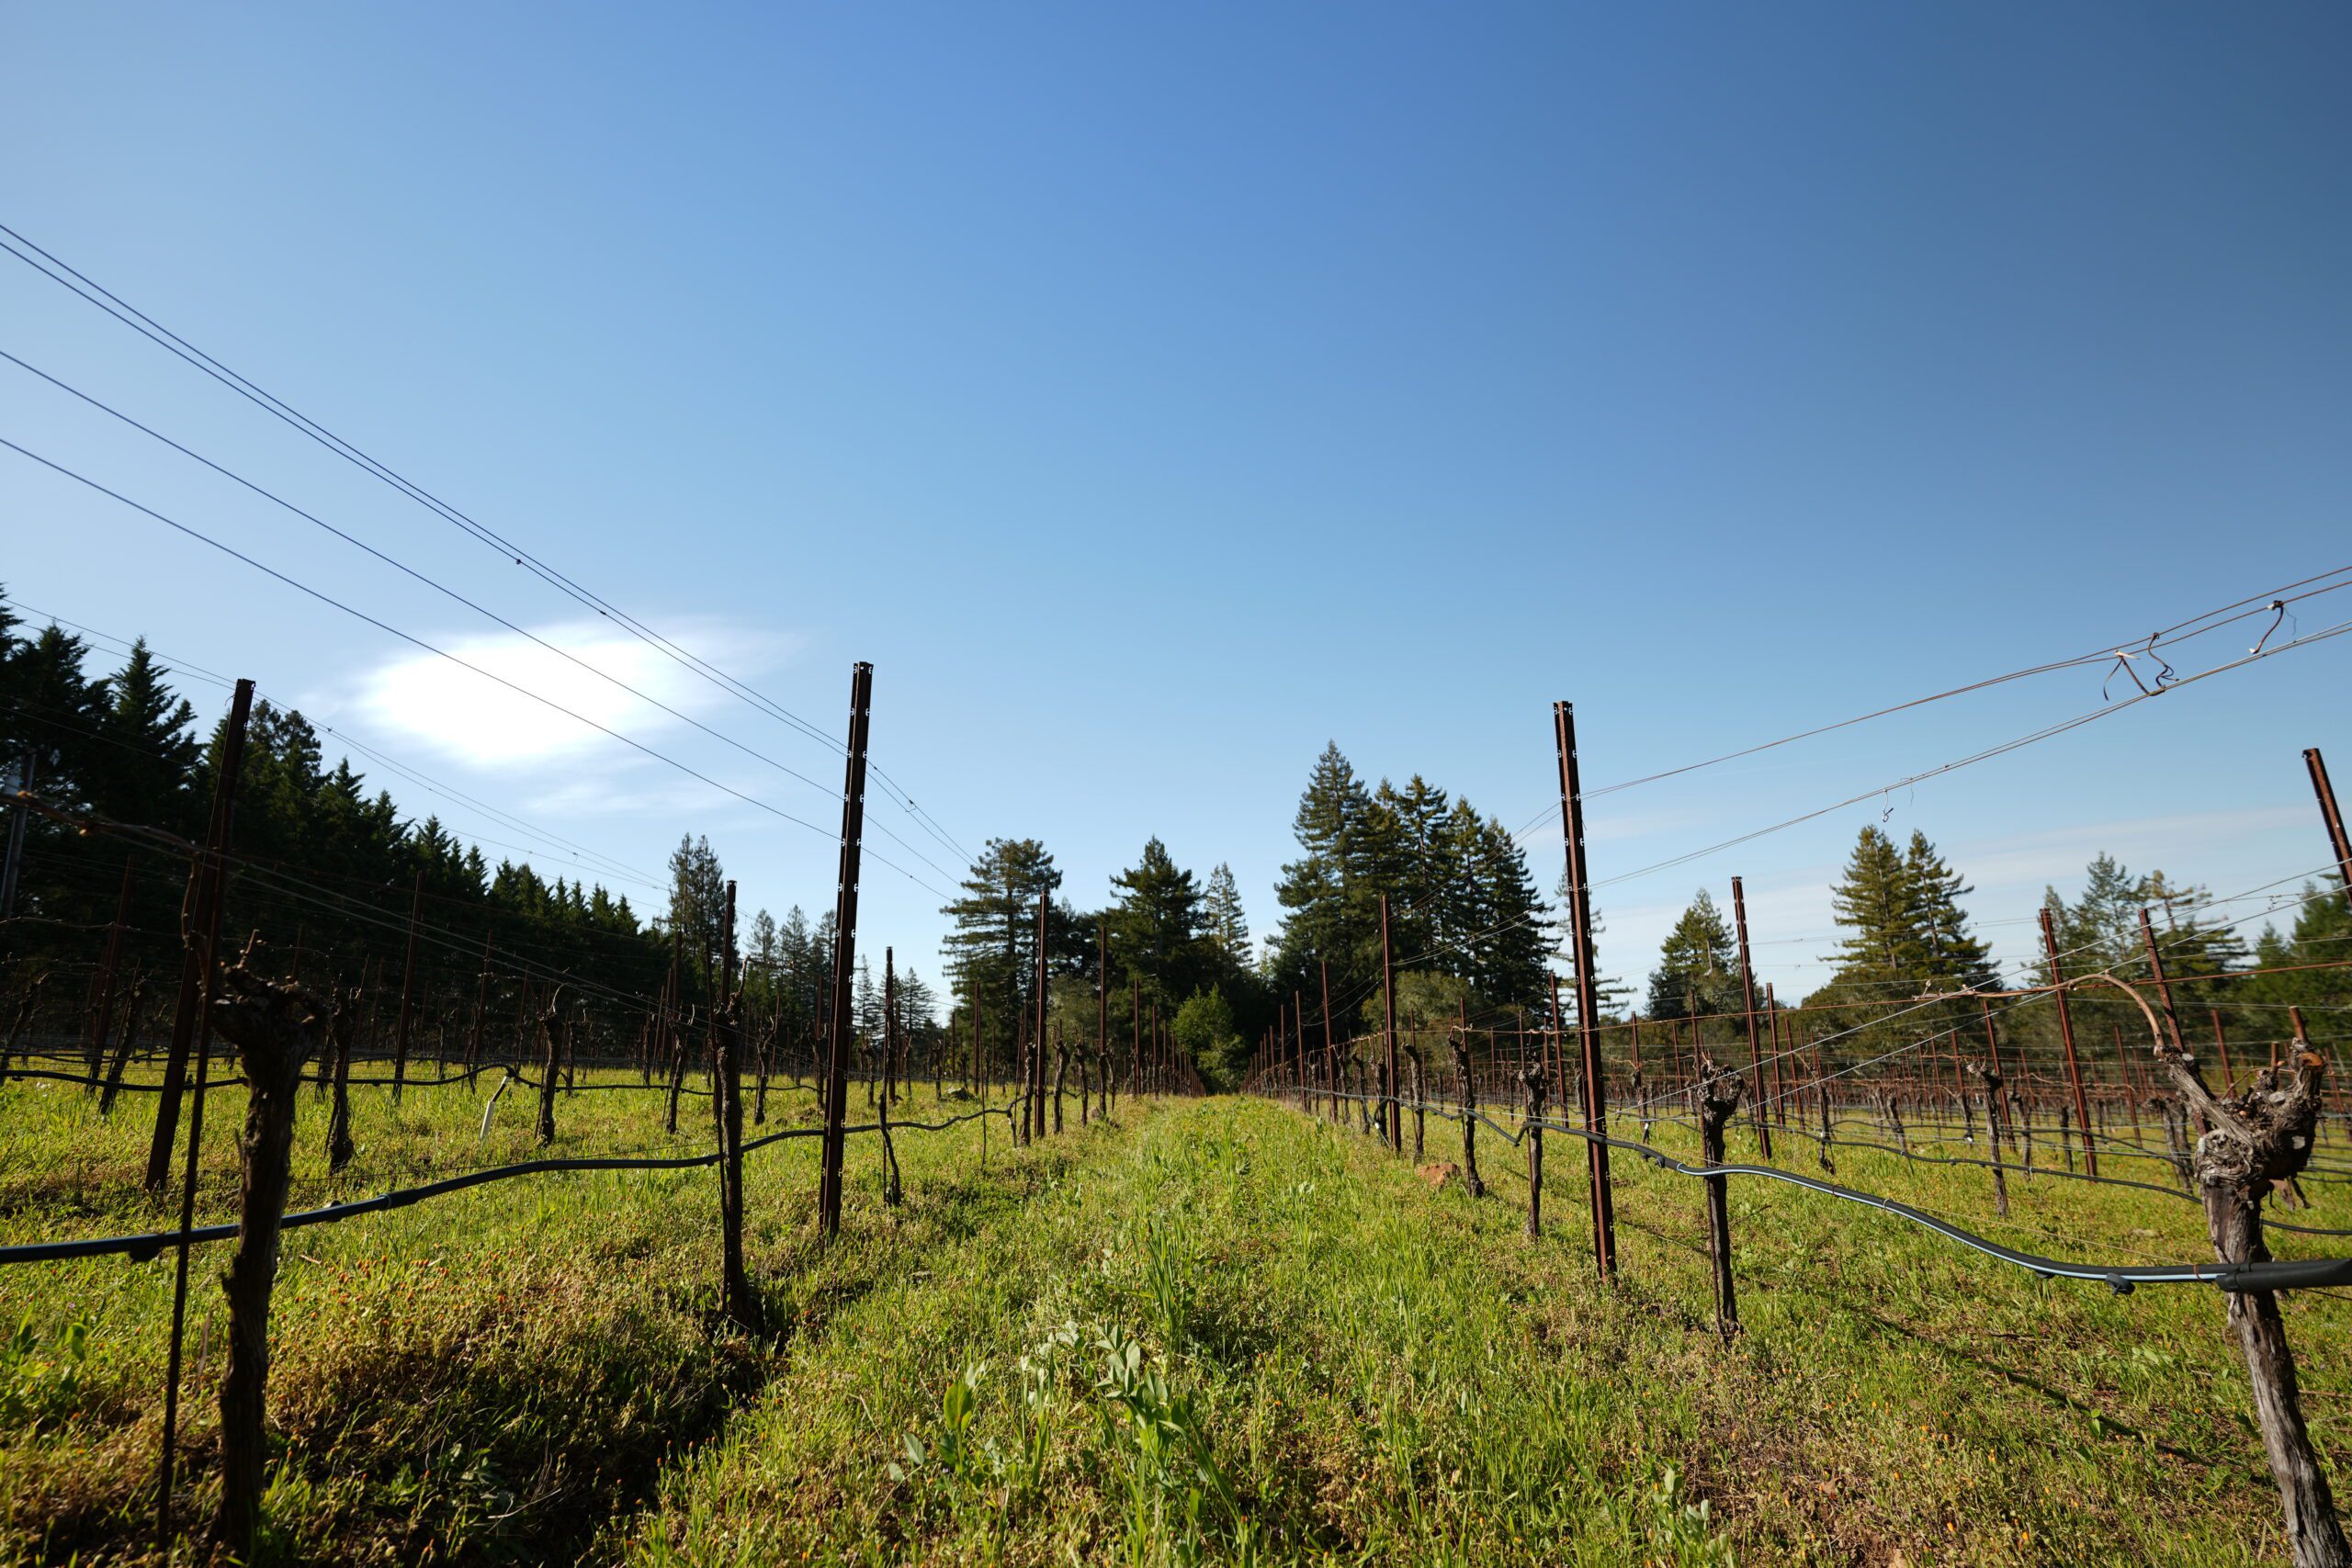 A sustainable vineyard in Napa